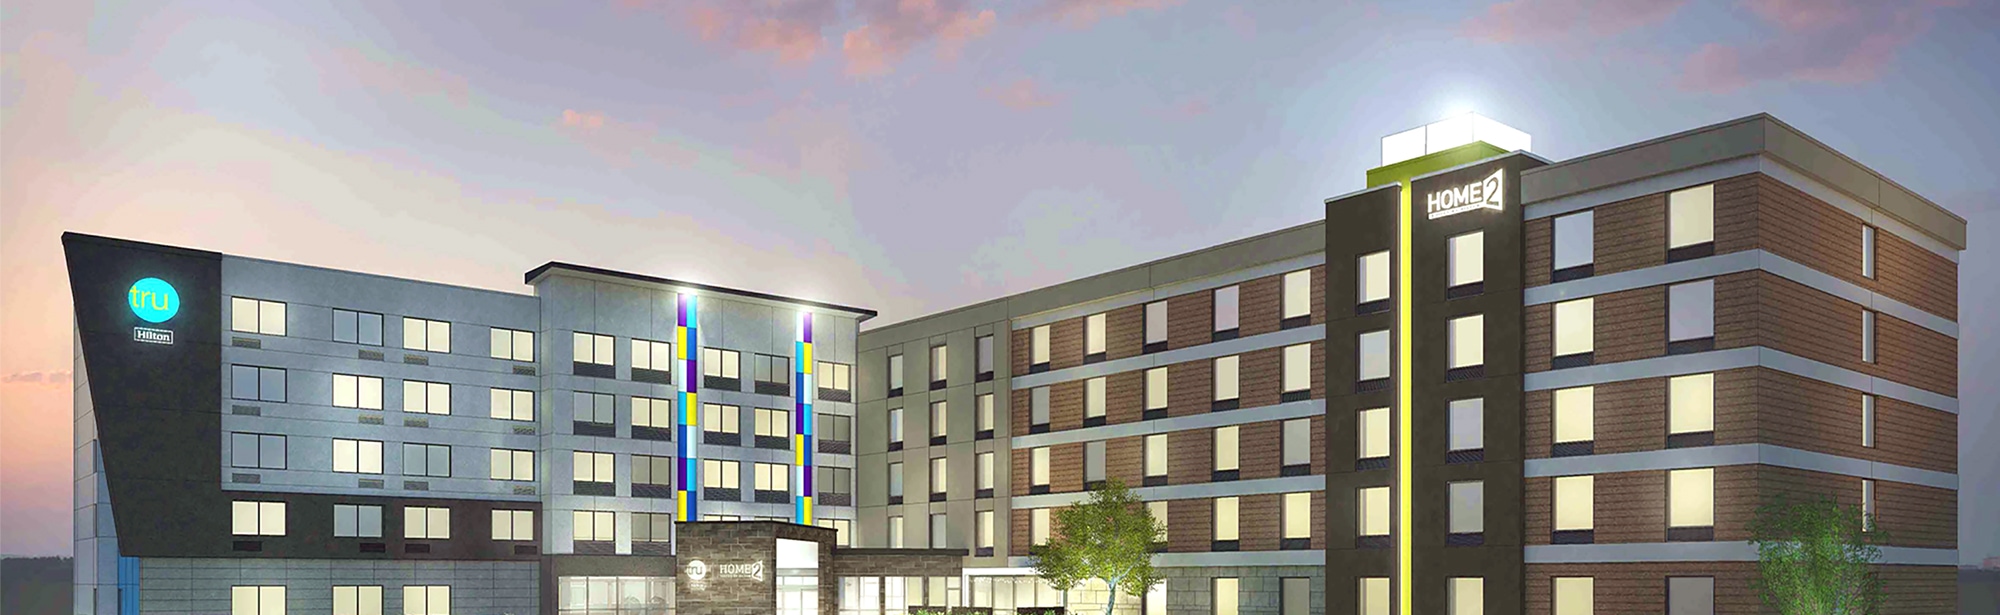 Development of Dual-Branded Hilton Hotel Investment